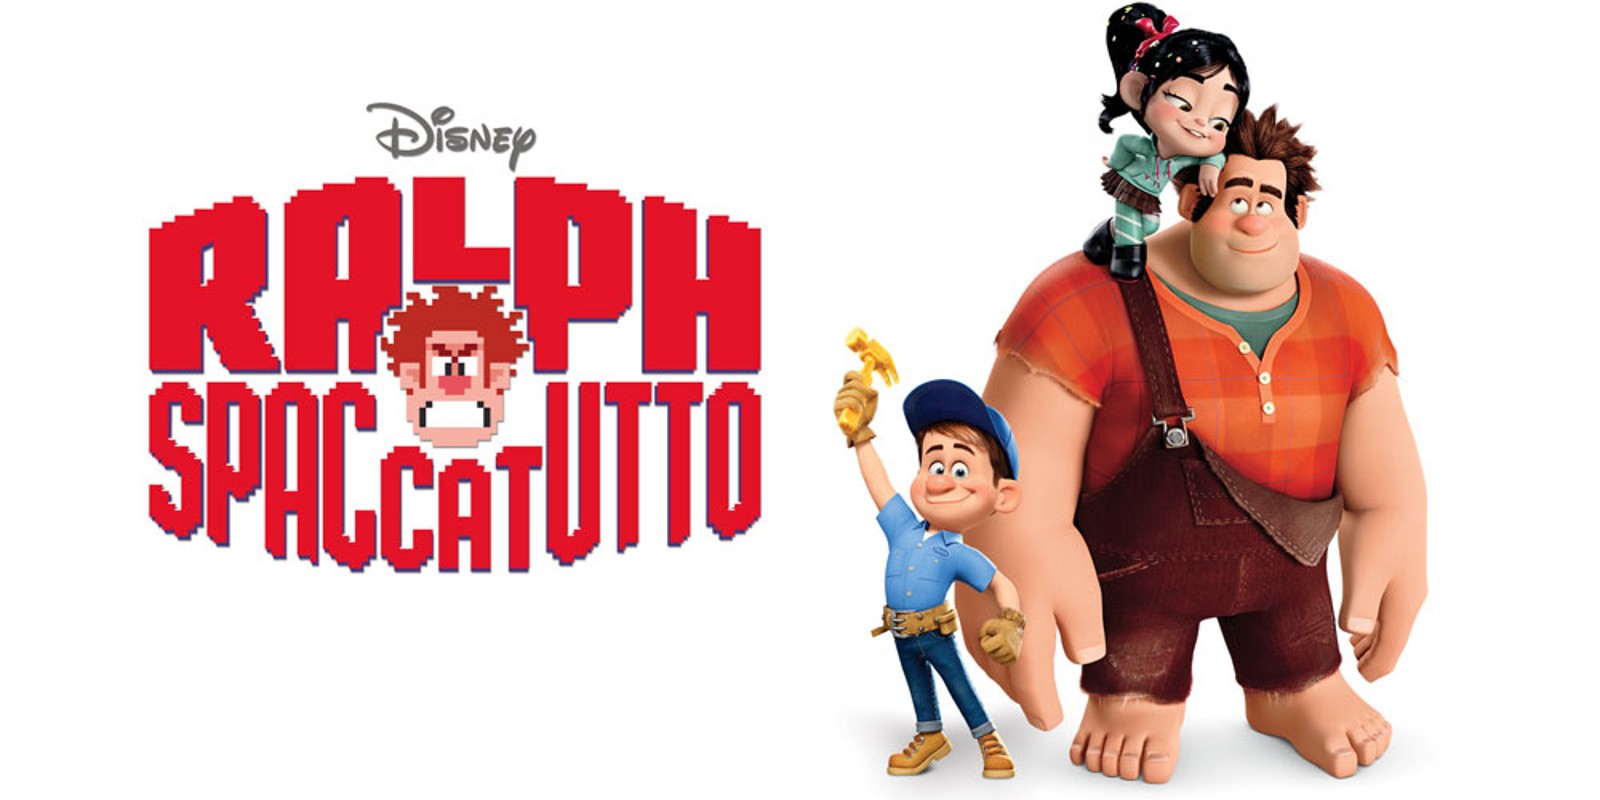 SI Wii WreckItRalph itIT image1600w